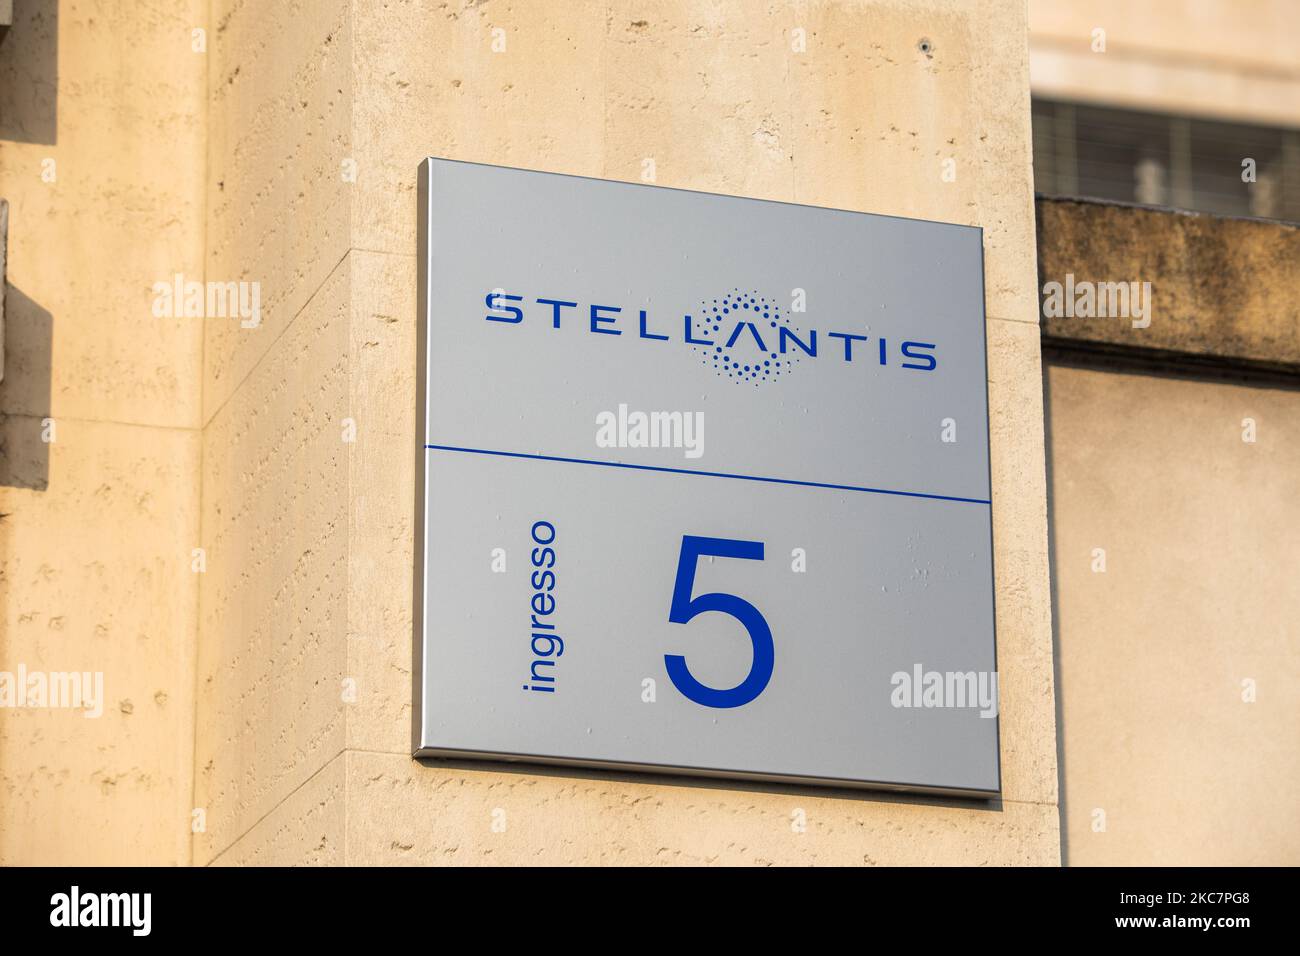 A view of the historical FIAT plant in Turin, Italy, on January 18, 2021. The historical FIAT plant of Mirafiori showcases the new logo on the First day on the stock-market for Stellantis the multinational automotive manufacturing corporation resulting from the merger of French automaker Groupe PSA and Italian-American automaker Fiat Chrysler Automobiles. The group includes 14 brands: Abarth, Alfa Romeo, Chrysler, Citroen, Dodge, DS, Fiat, Jeep, Lancia, Maserati, Opel, Peugeot, Ram, and Vauxhall. (Photo by Mauro Ujetto/NurPhoto) Stock Photo